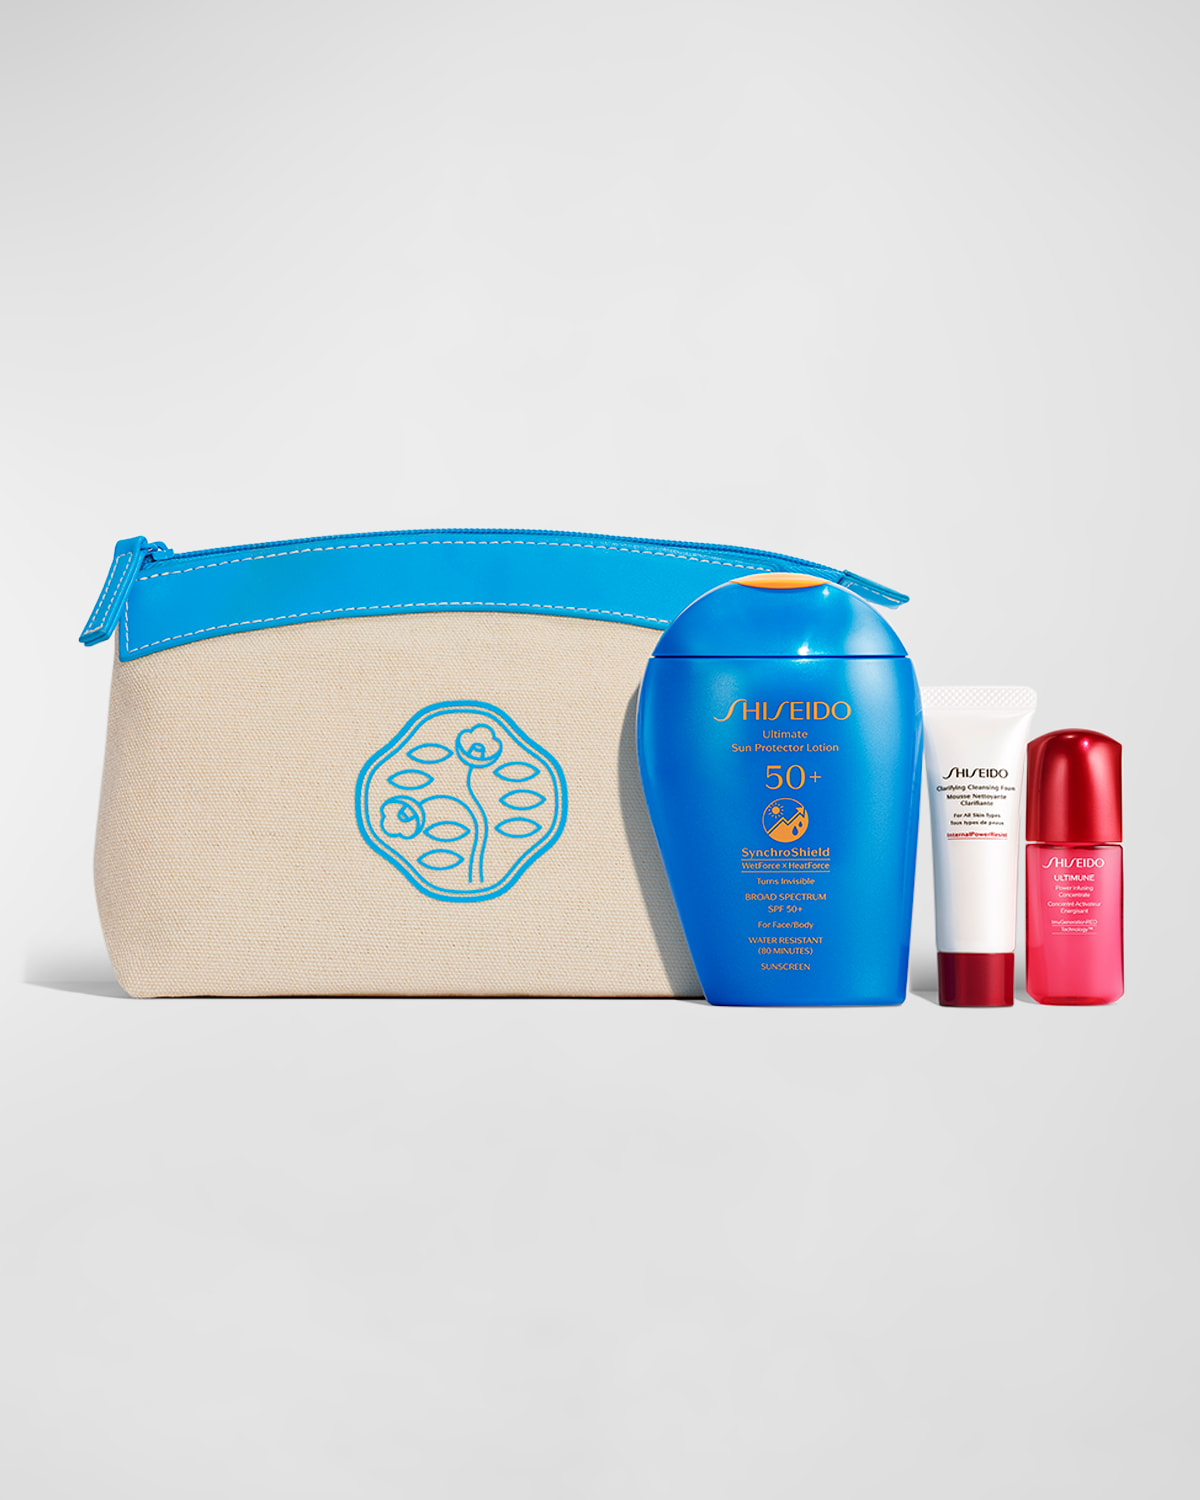 Limited Edition Active Sun Protection Set ($79 Value)